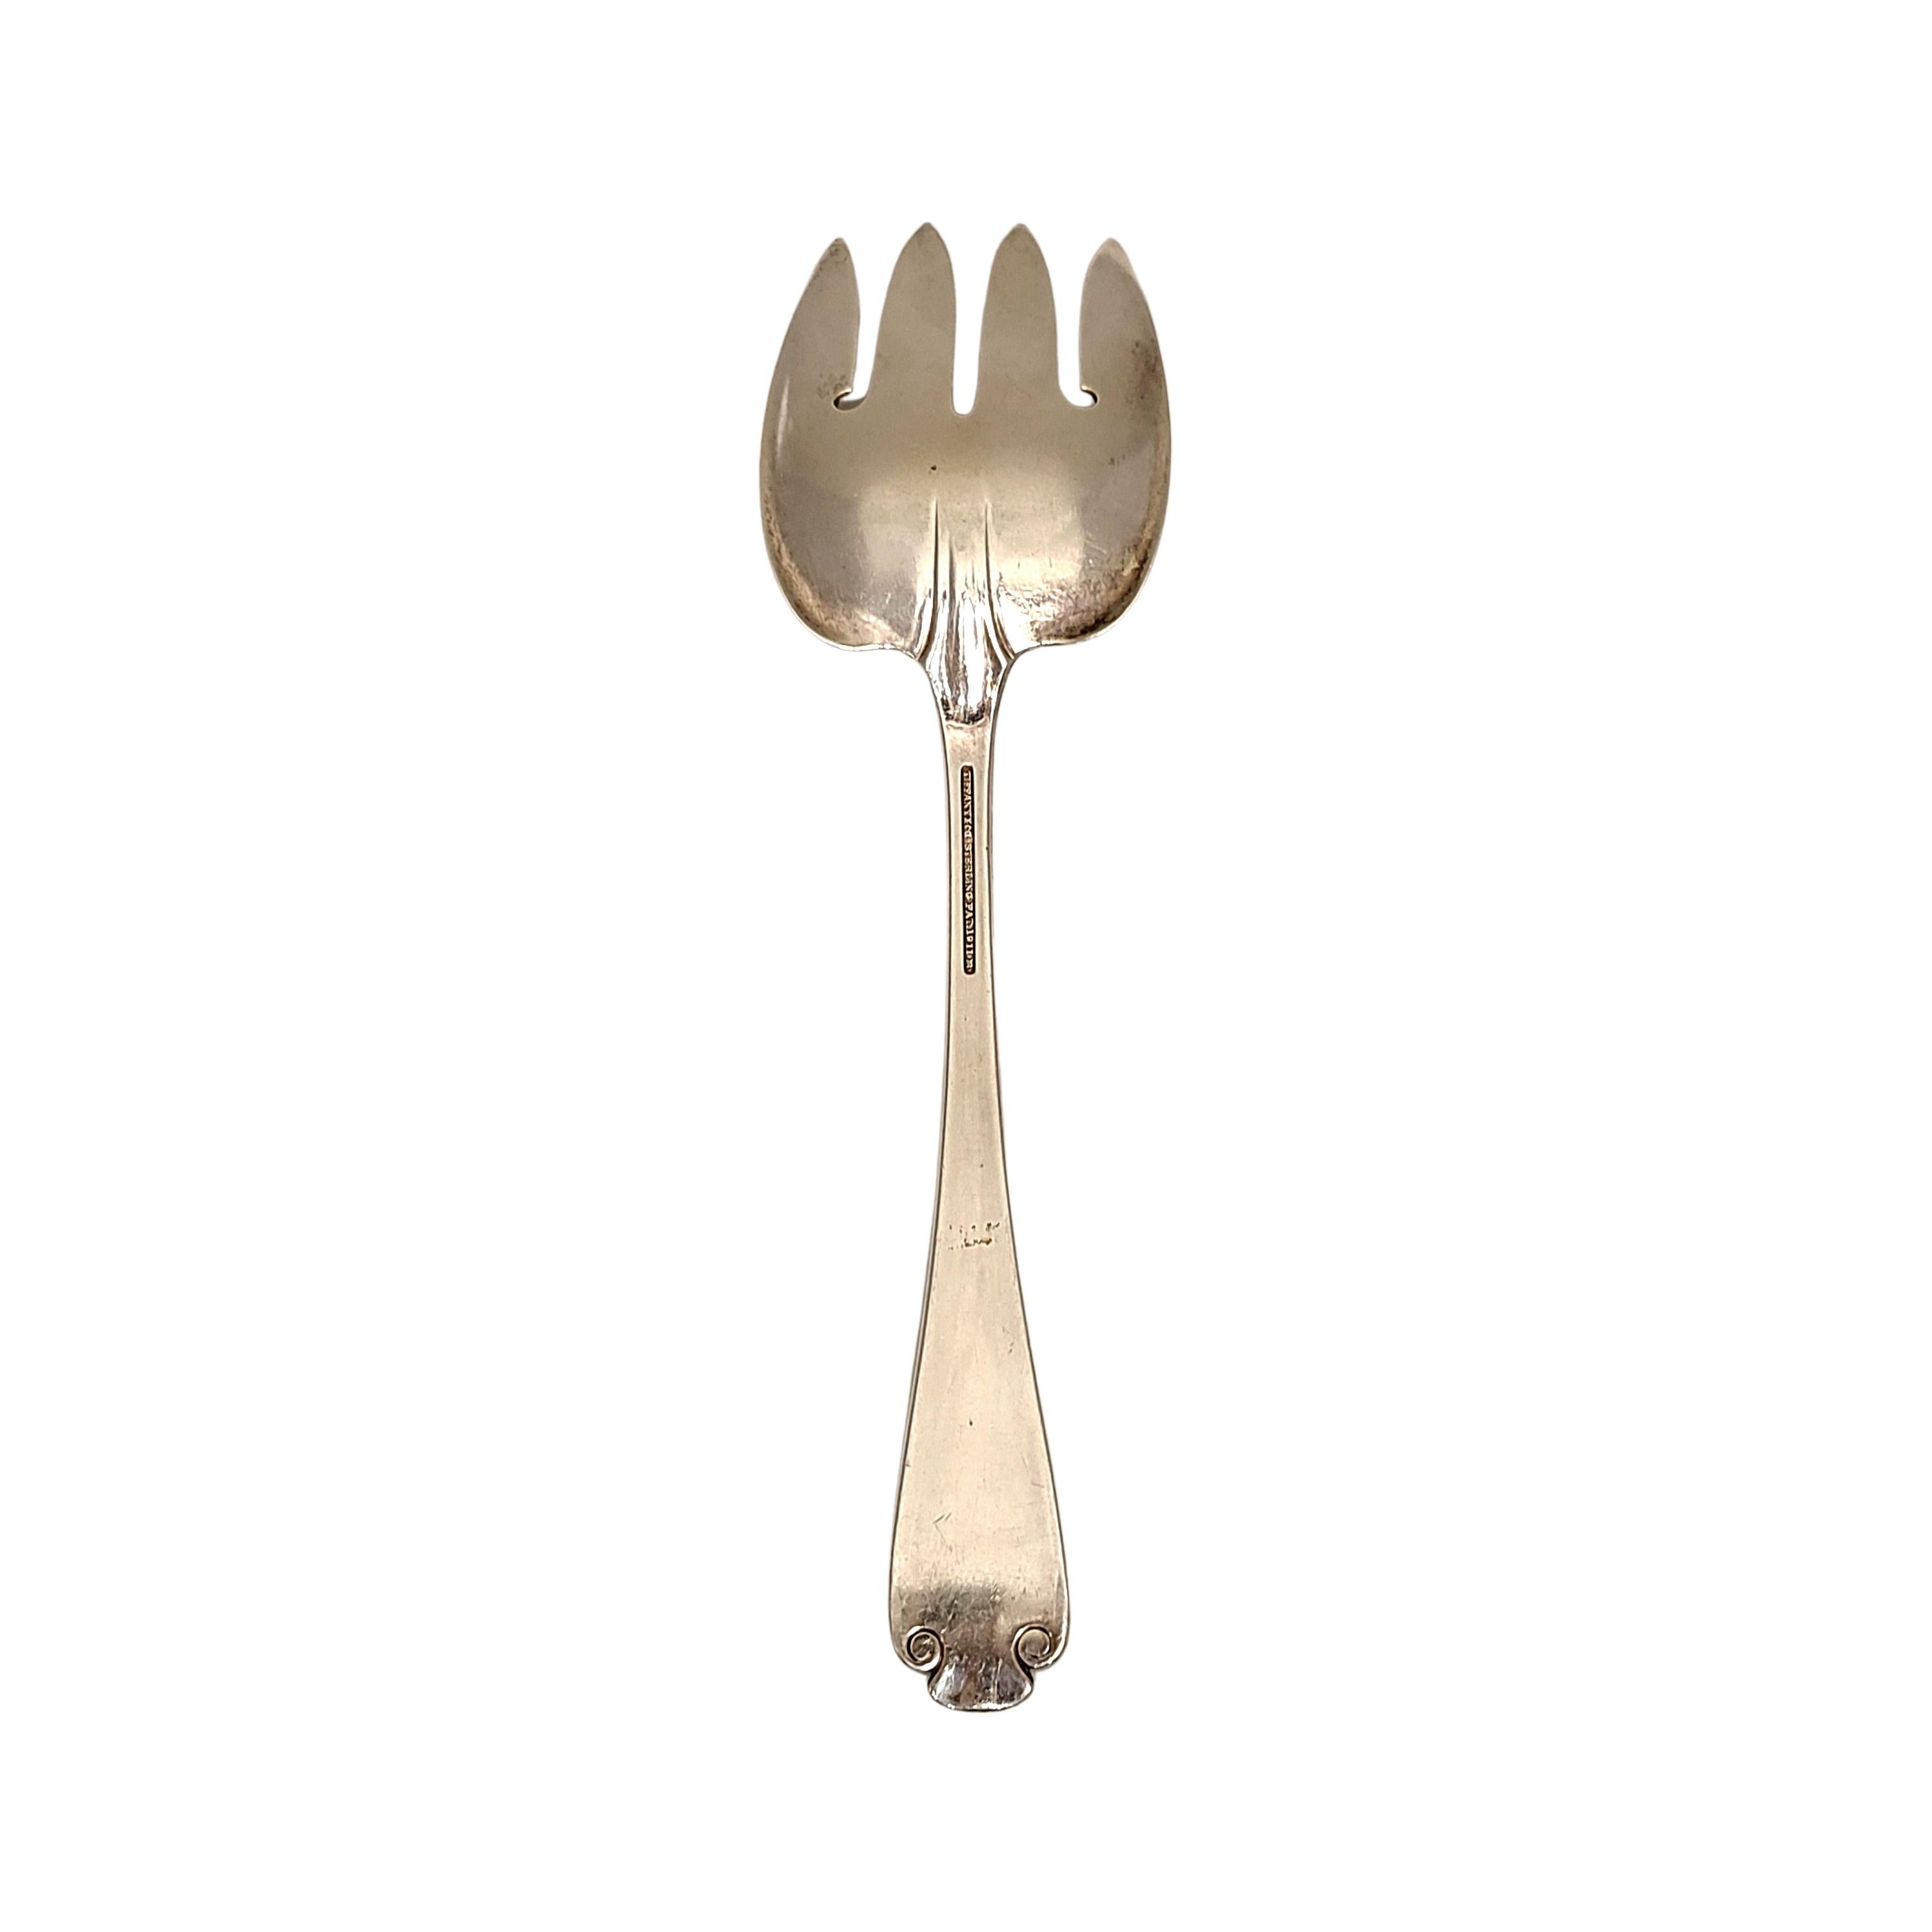 Sterling silver large fish serving fork by Tiffany & Co in the Flemish pattern.

Monogram appears to be LHA

Beautiful heavy serving fork in the Flemish pattern, featuring a simple and elegant scroll design, making it a timeless classic that is